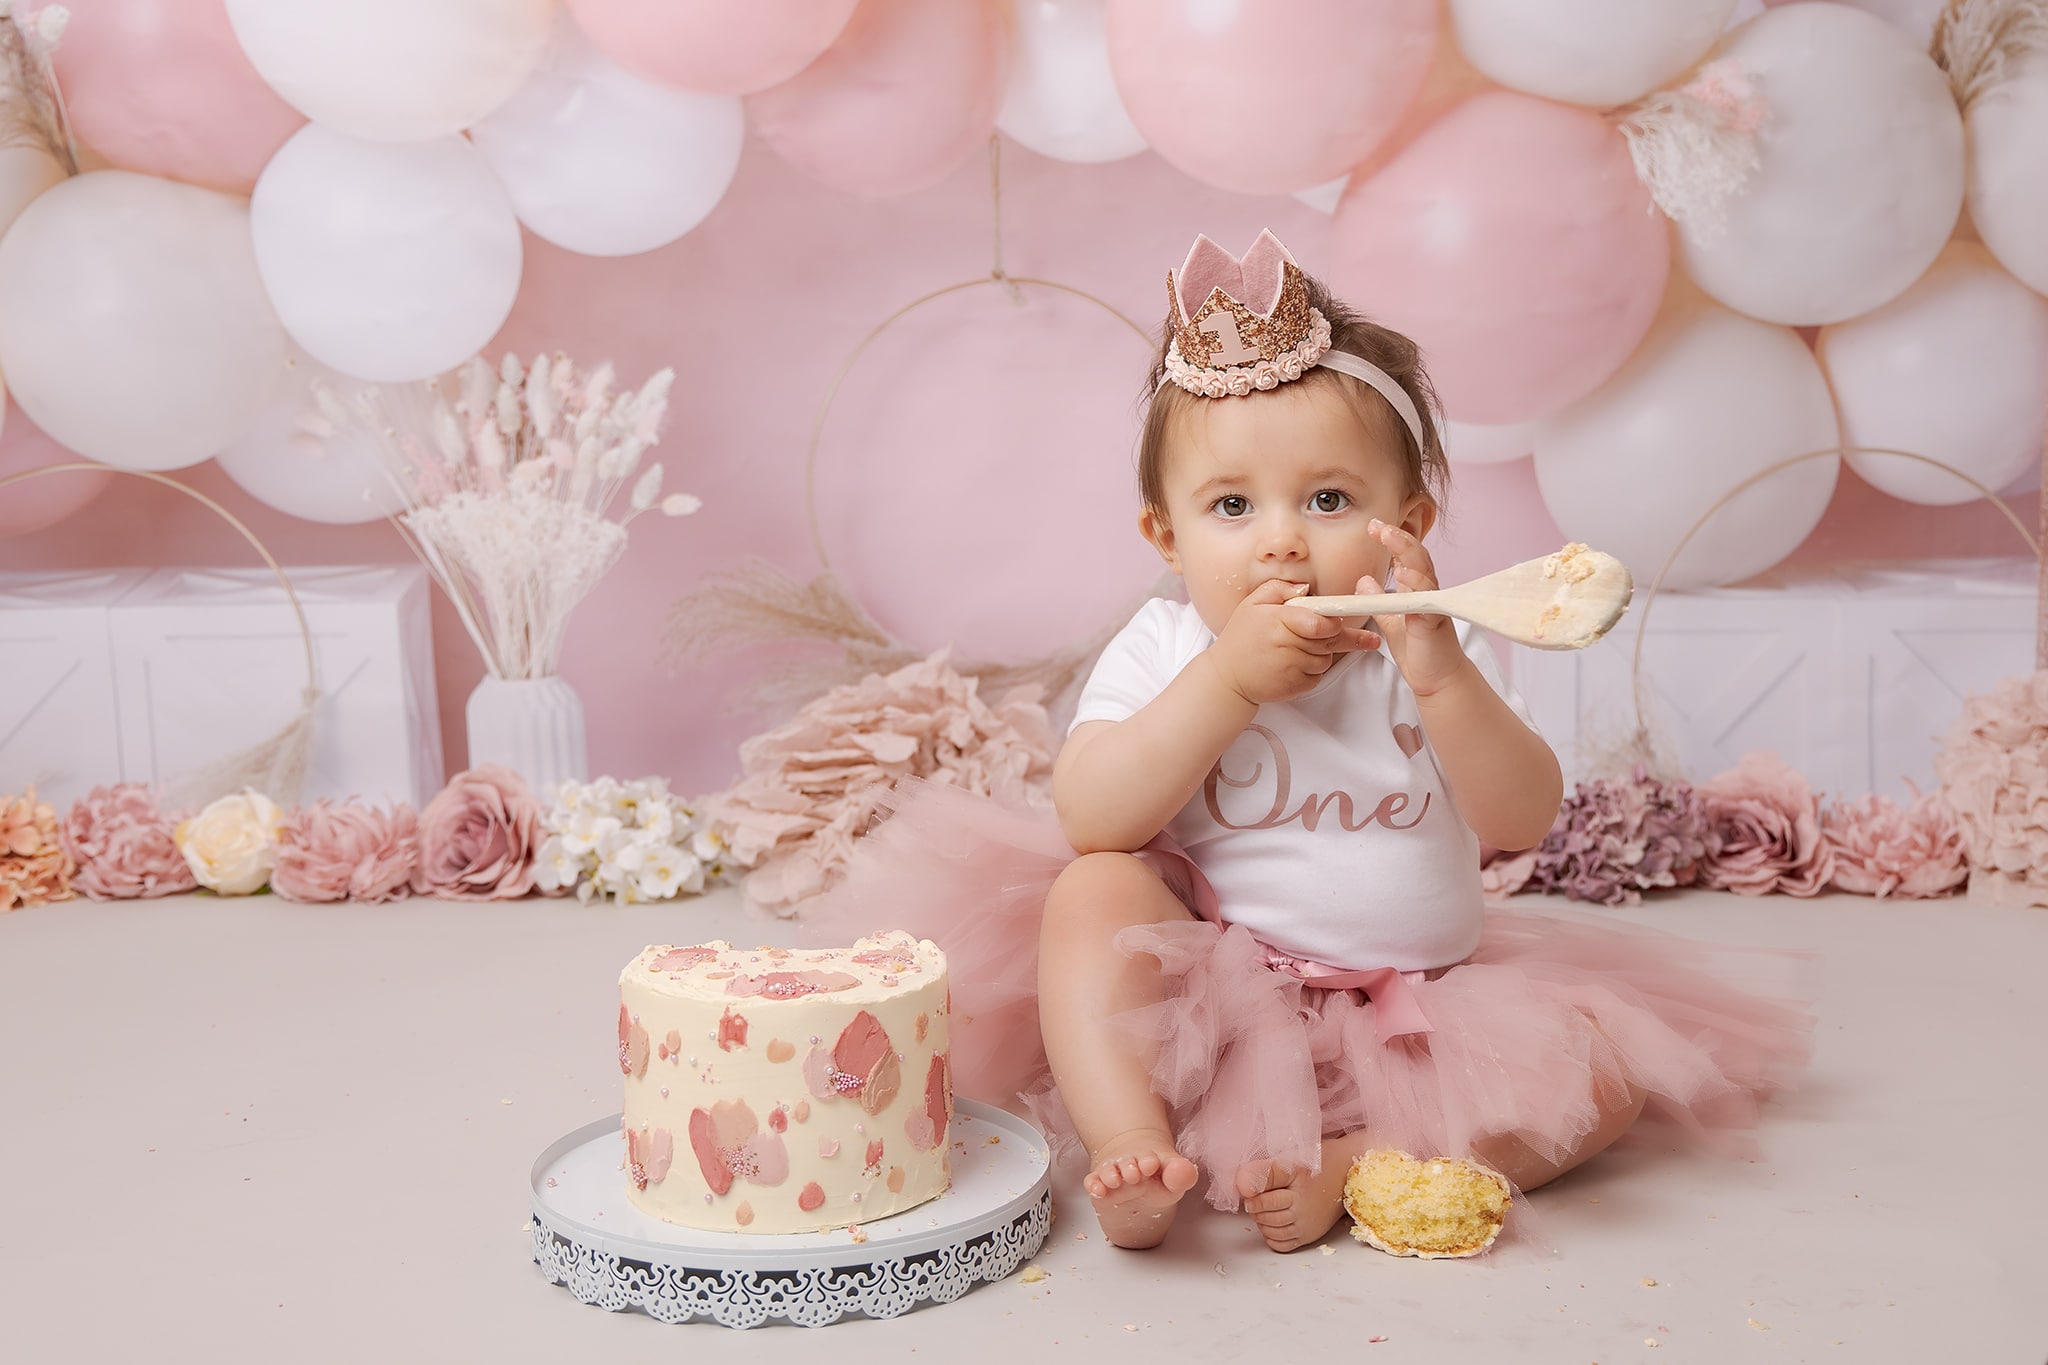 one year old with wooden spoon ready to smash her cake, during her cake smash photoshoot in Sutton Coldfield Birmingham 